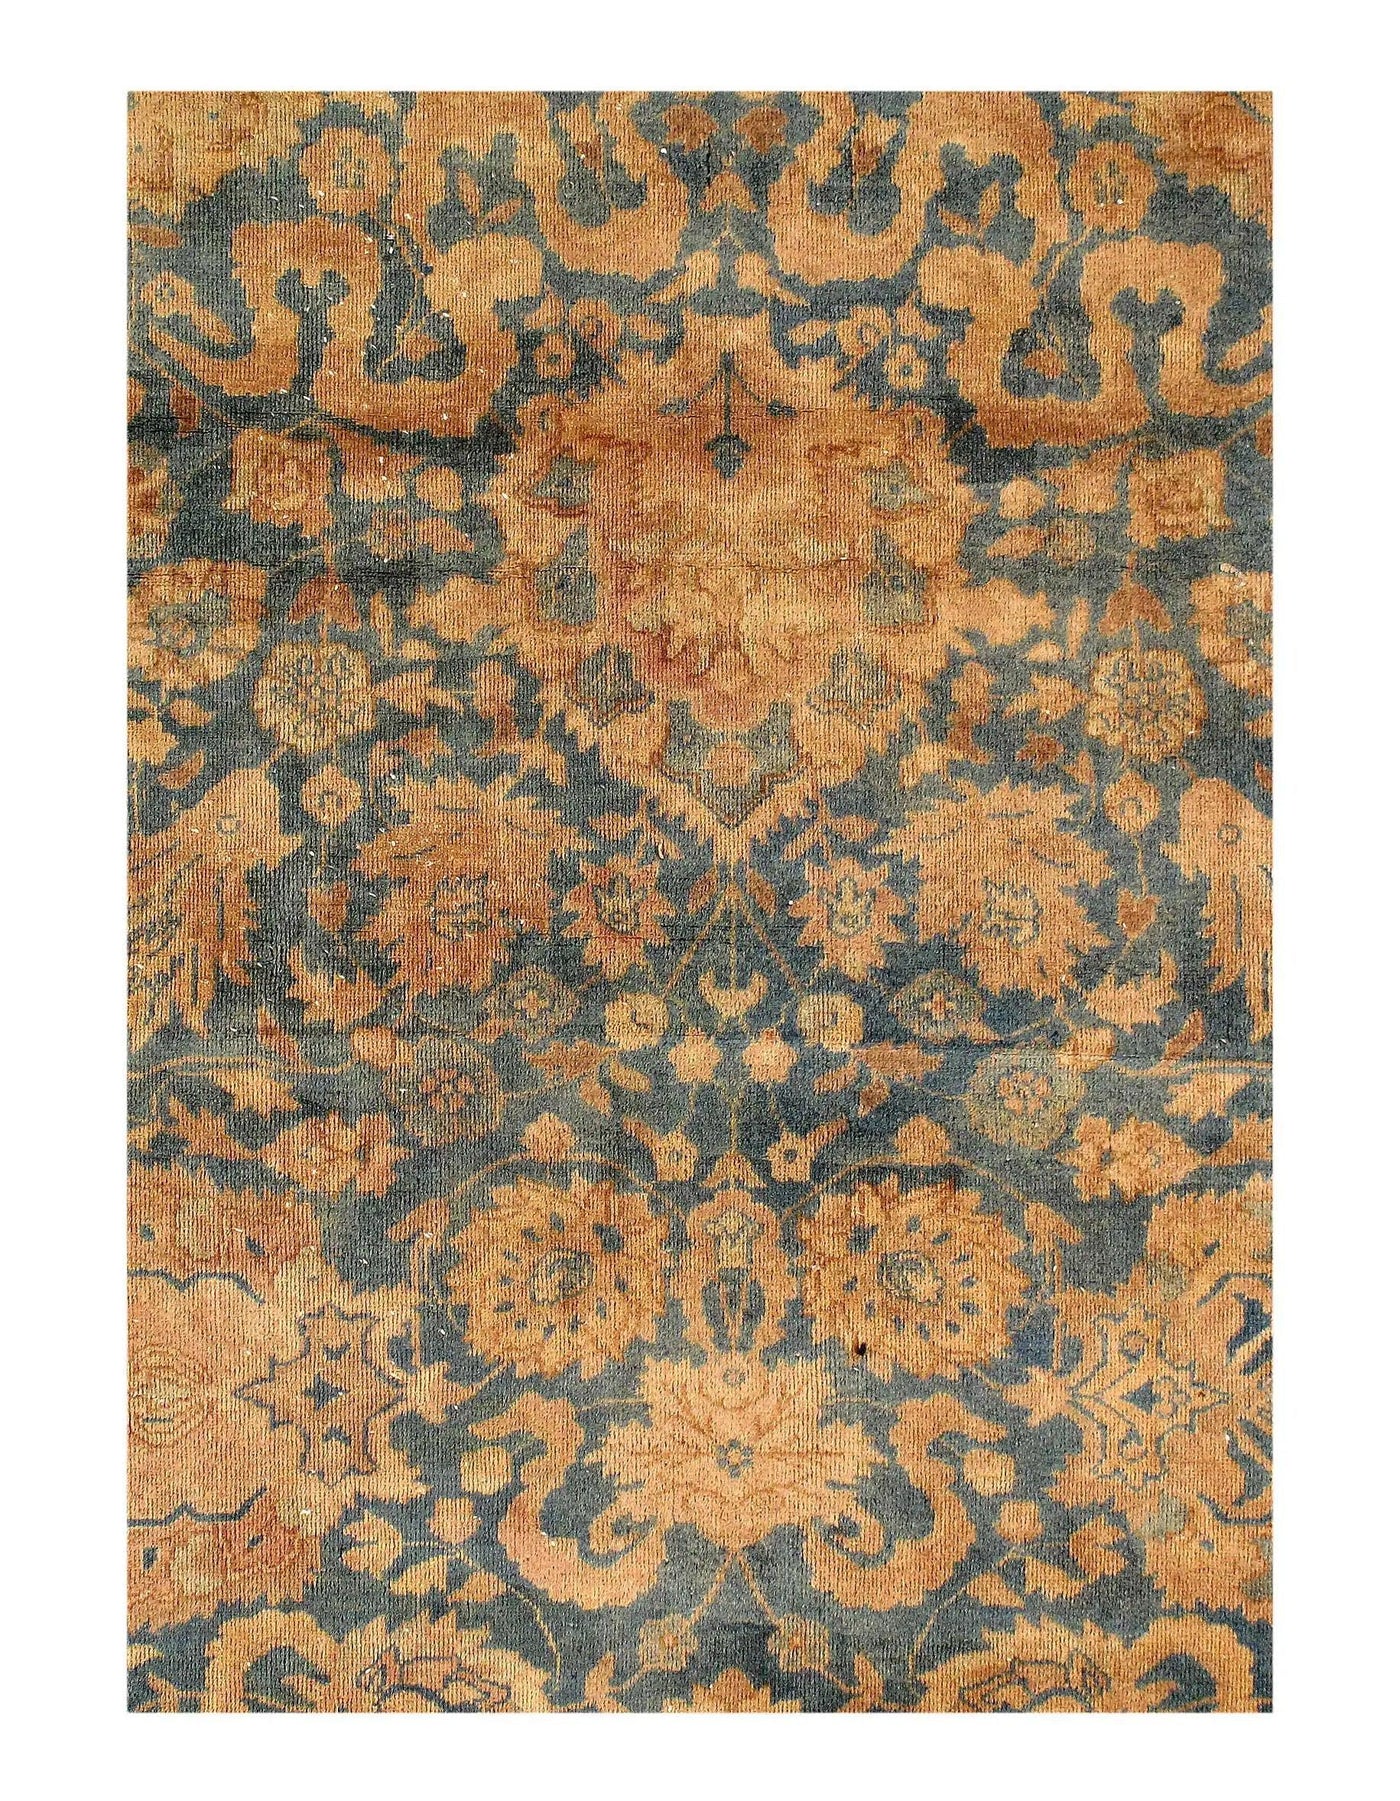 Canvello Fine Antique Tabriz Gray And Gold Rug - 11'11'' X 19'1''